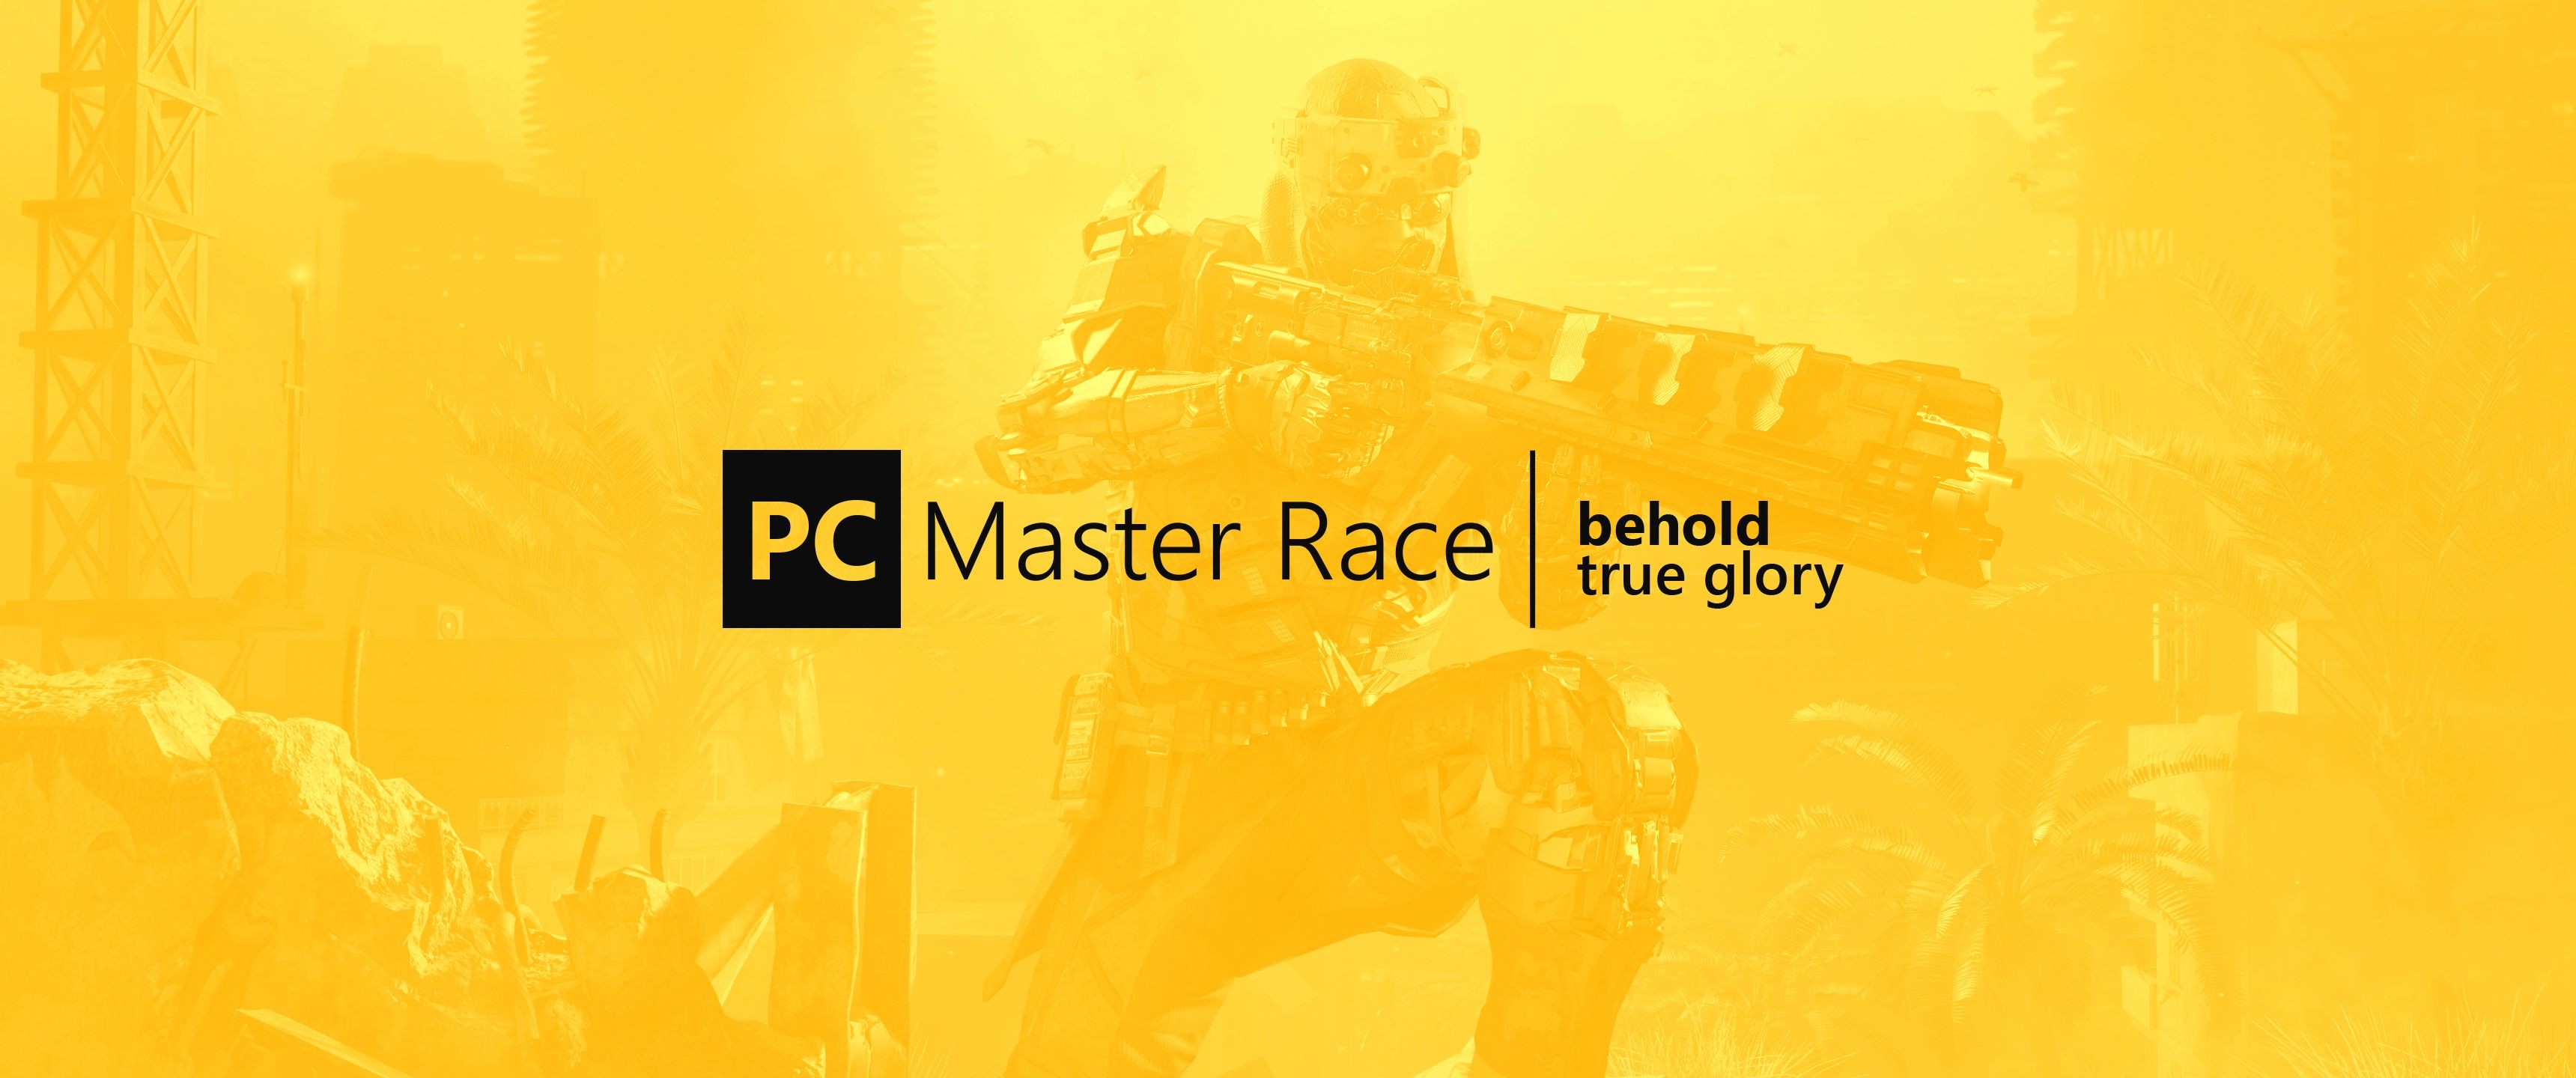 General 3440x1440 PC gaming PC Master  Race yellow background digital art